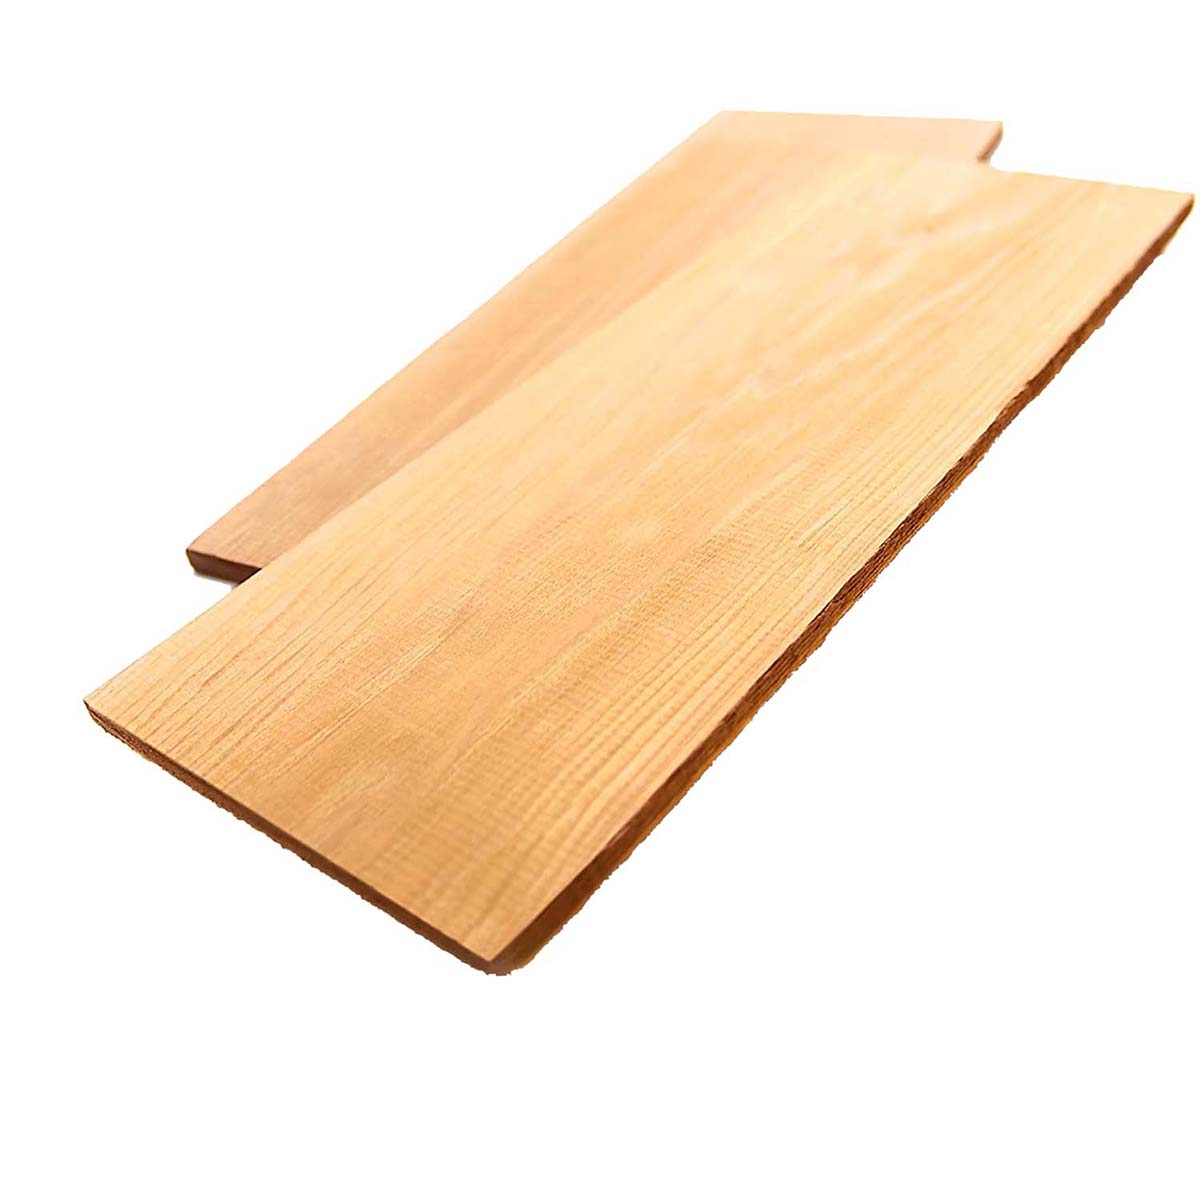 Picture of 21 Century B42B 12 x 6 in. Grilling Plank Cedar - Pack of 2